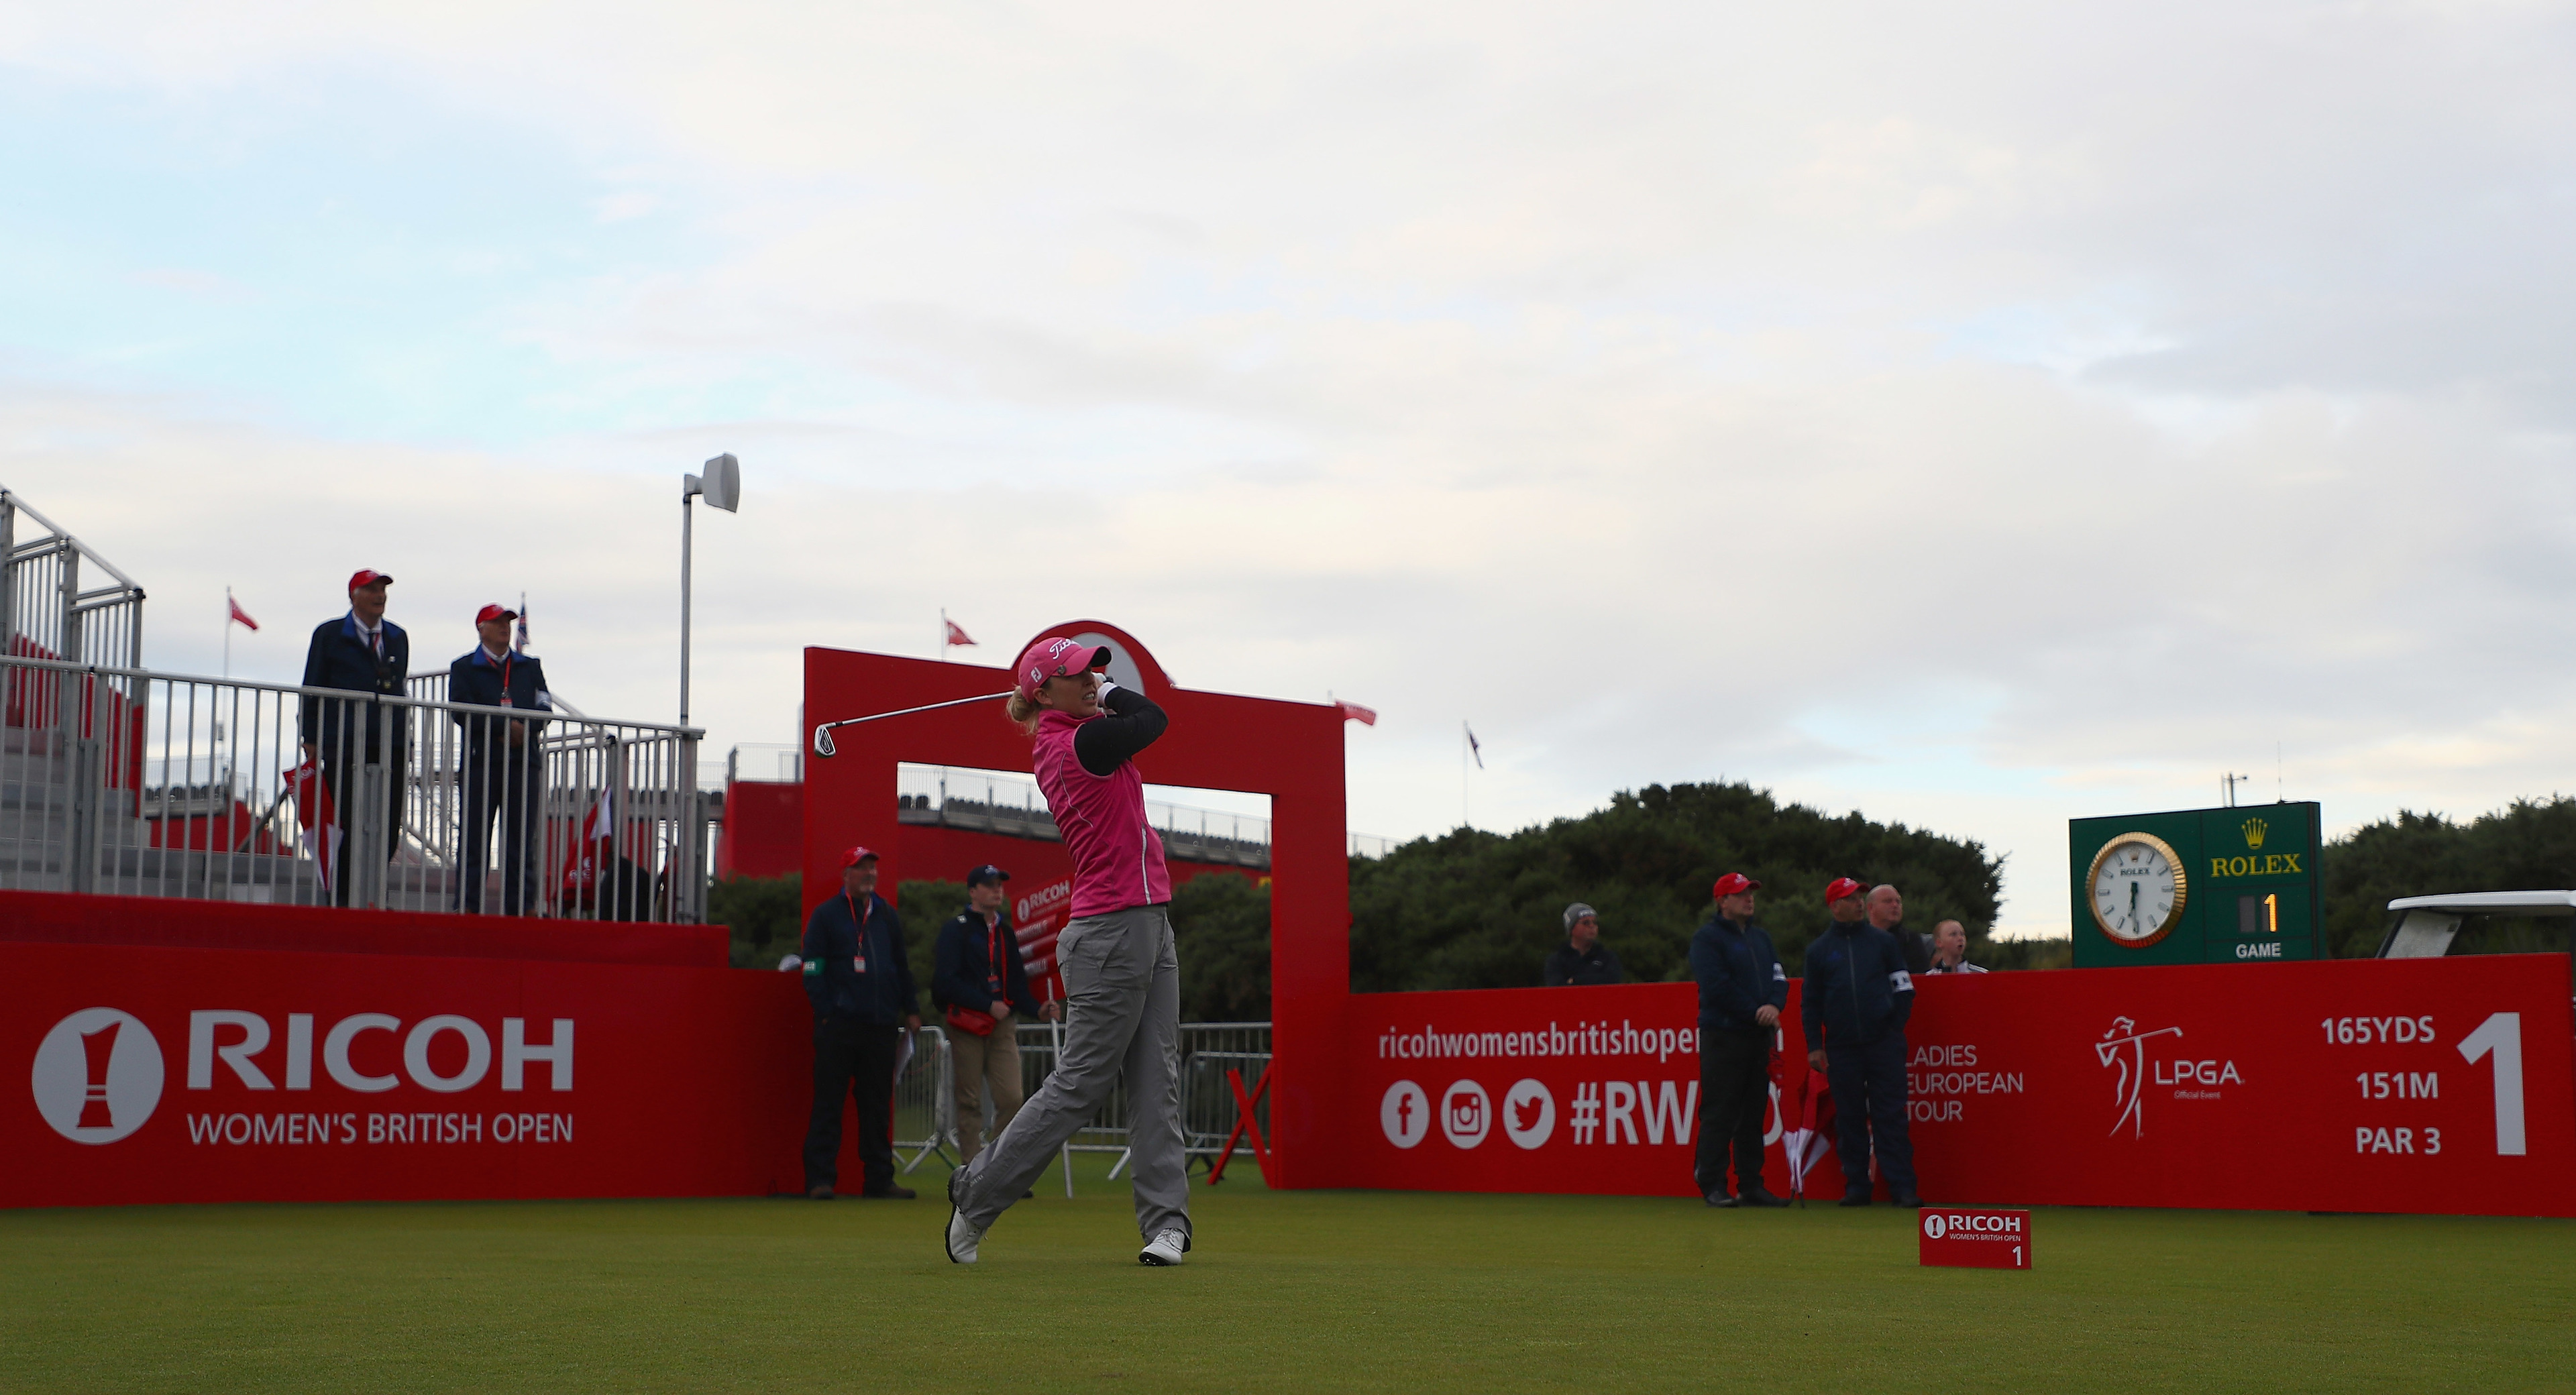 Sally Watson of Scotland hits the first blow of the Ricoh Women's British Open at Kingsbarns in her final event.